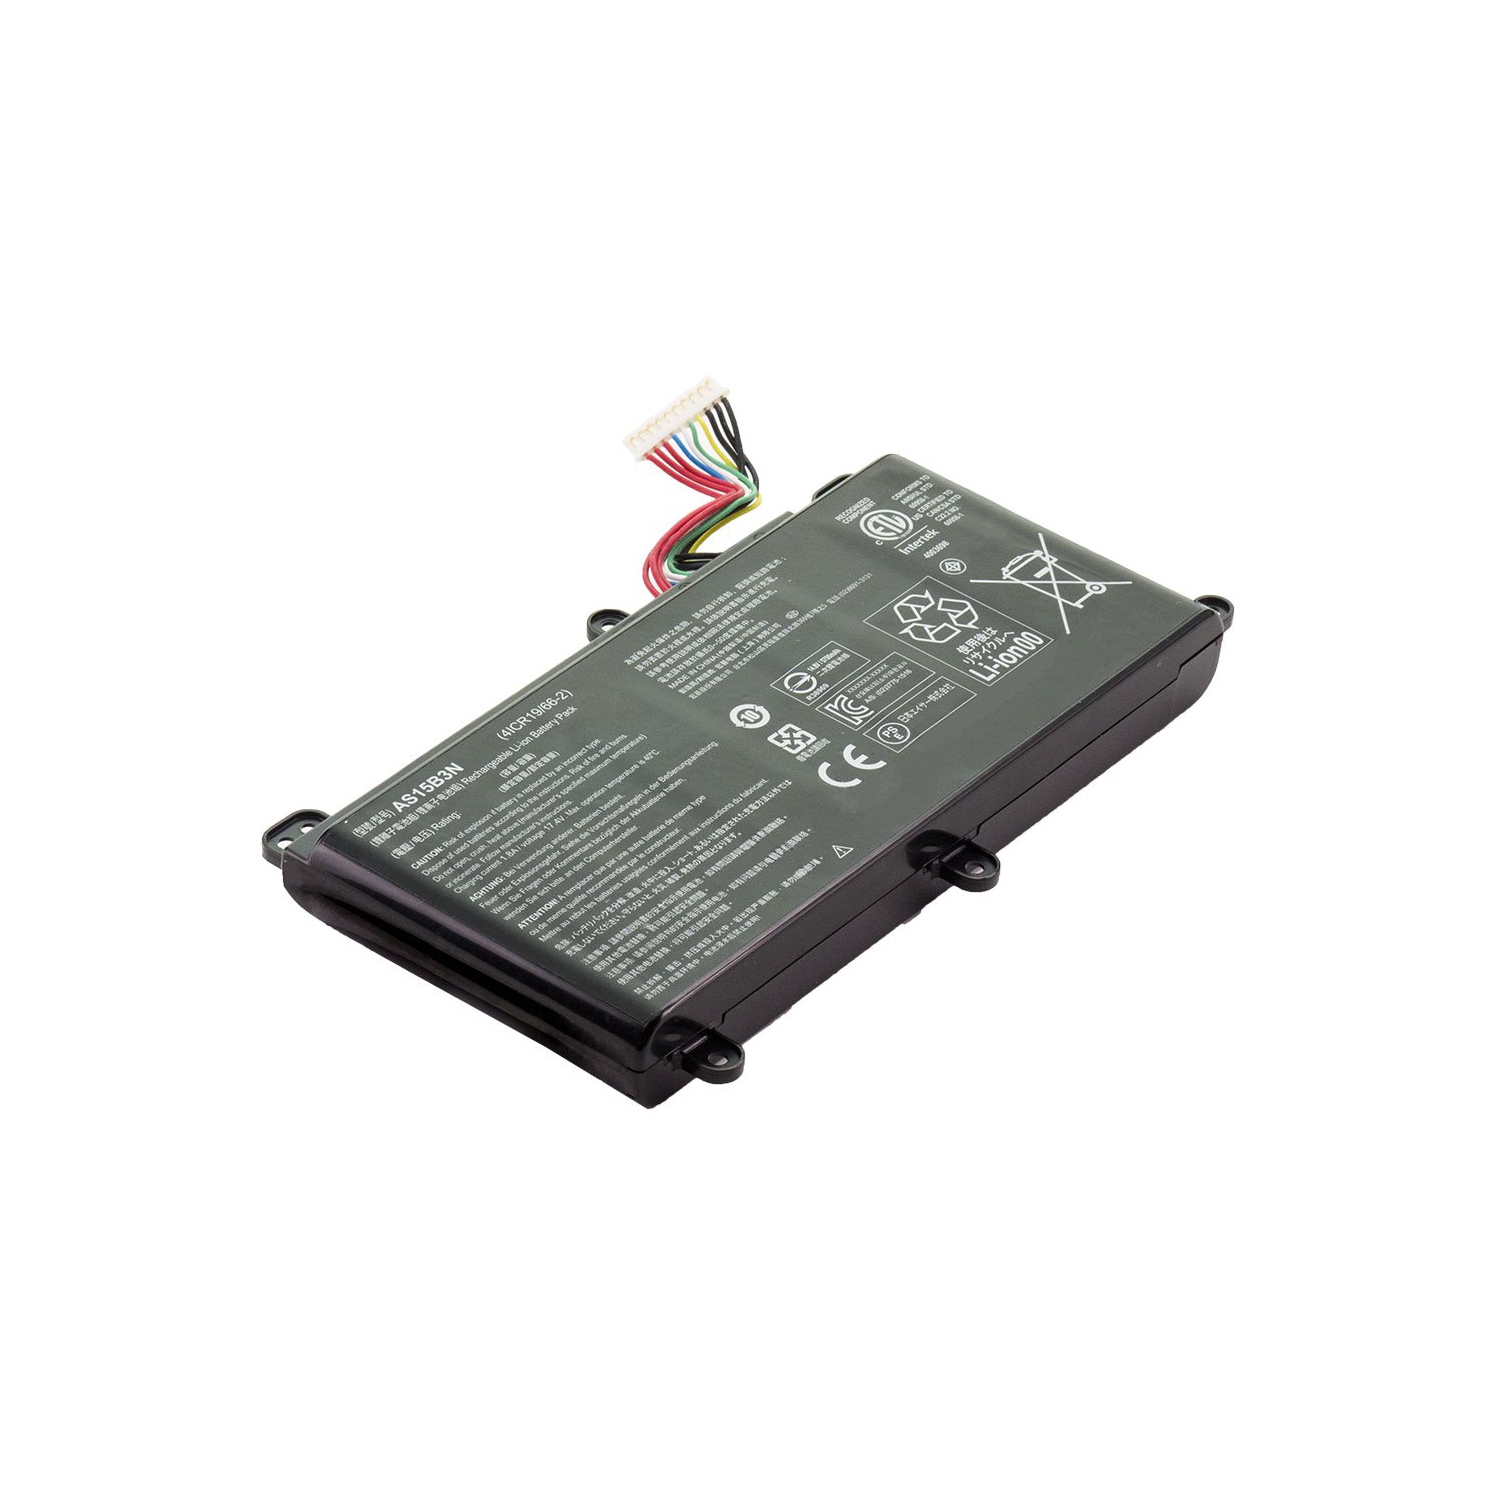 Laptop Battery Replacement for Acer Predator 15 G9-593, AS15B3N, KT.00803.004, KT.00803.005